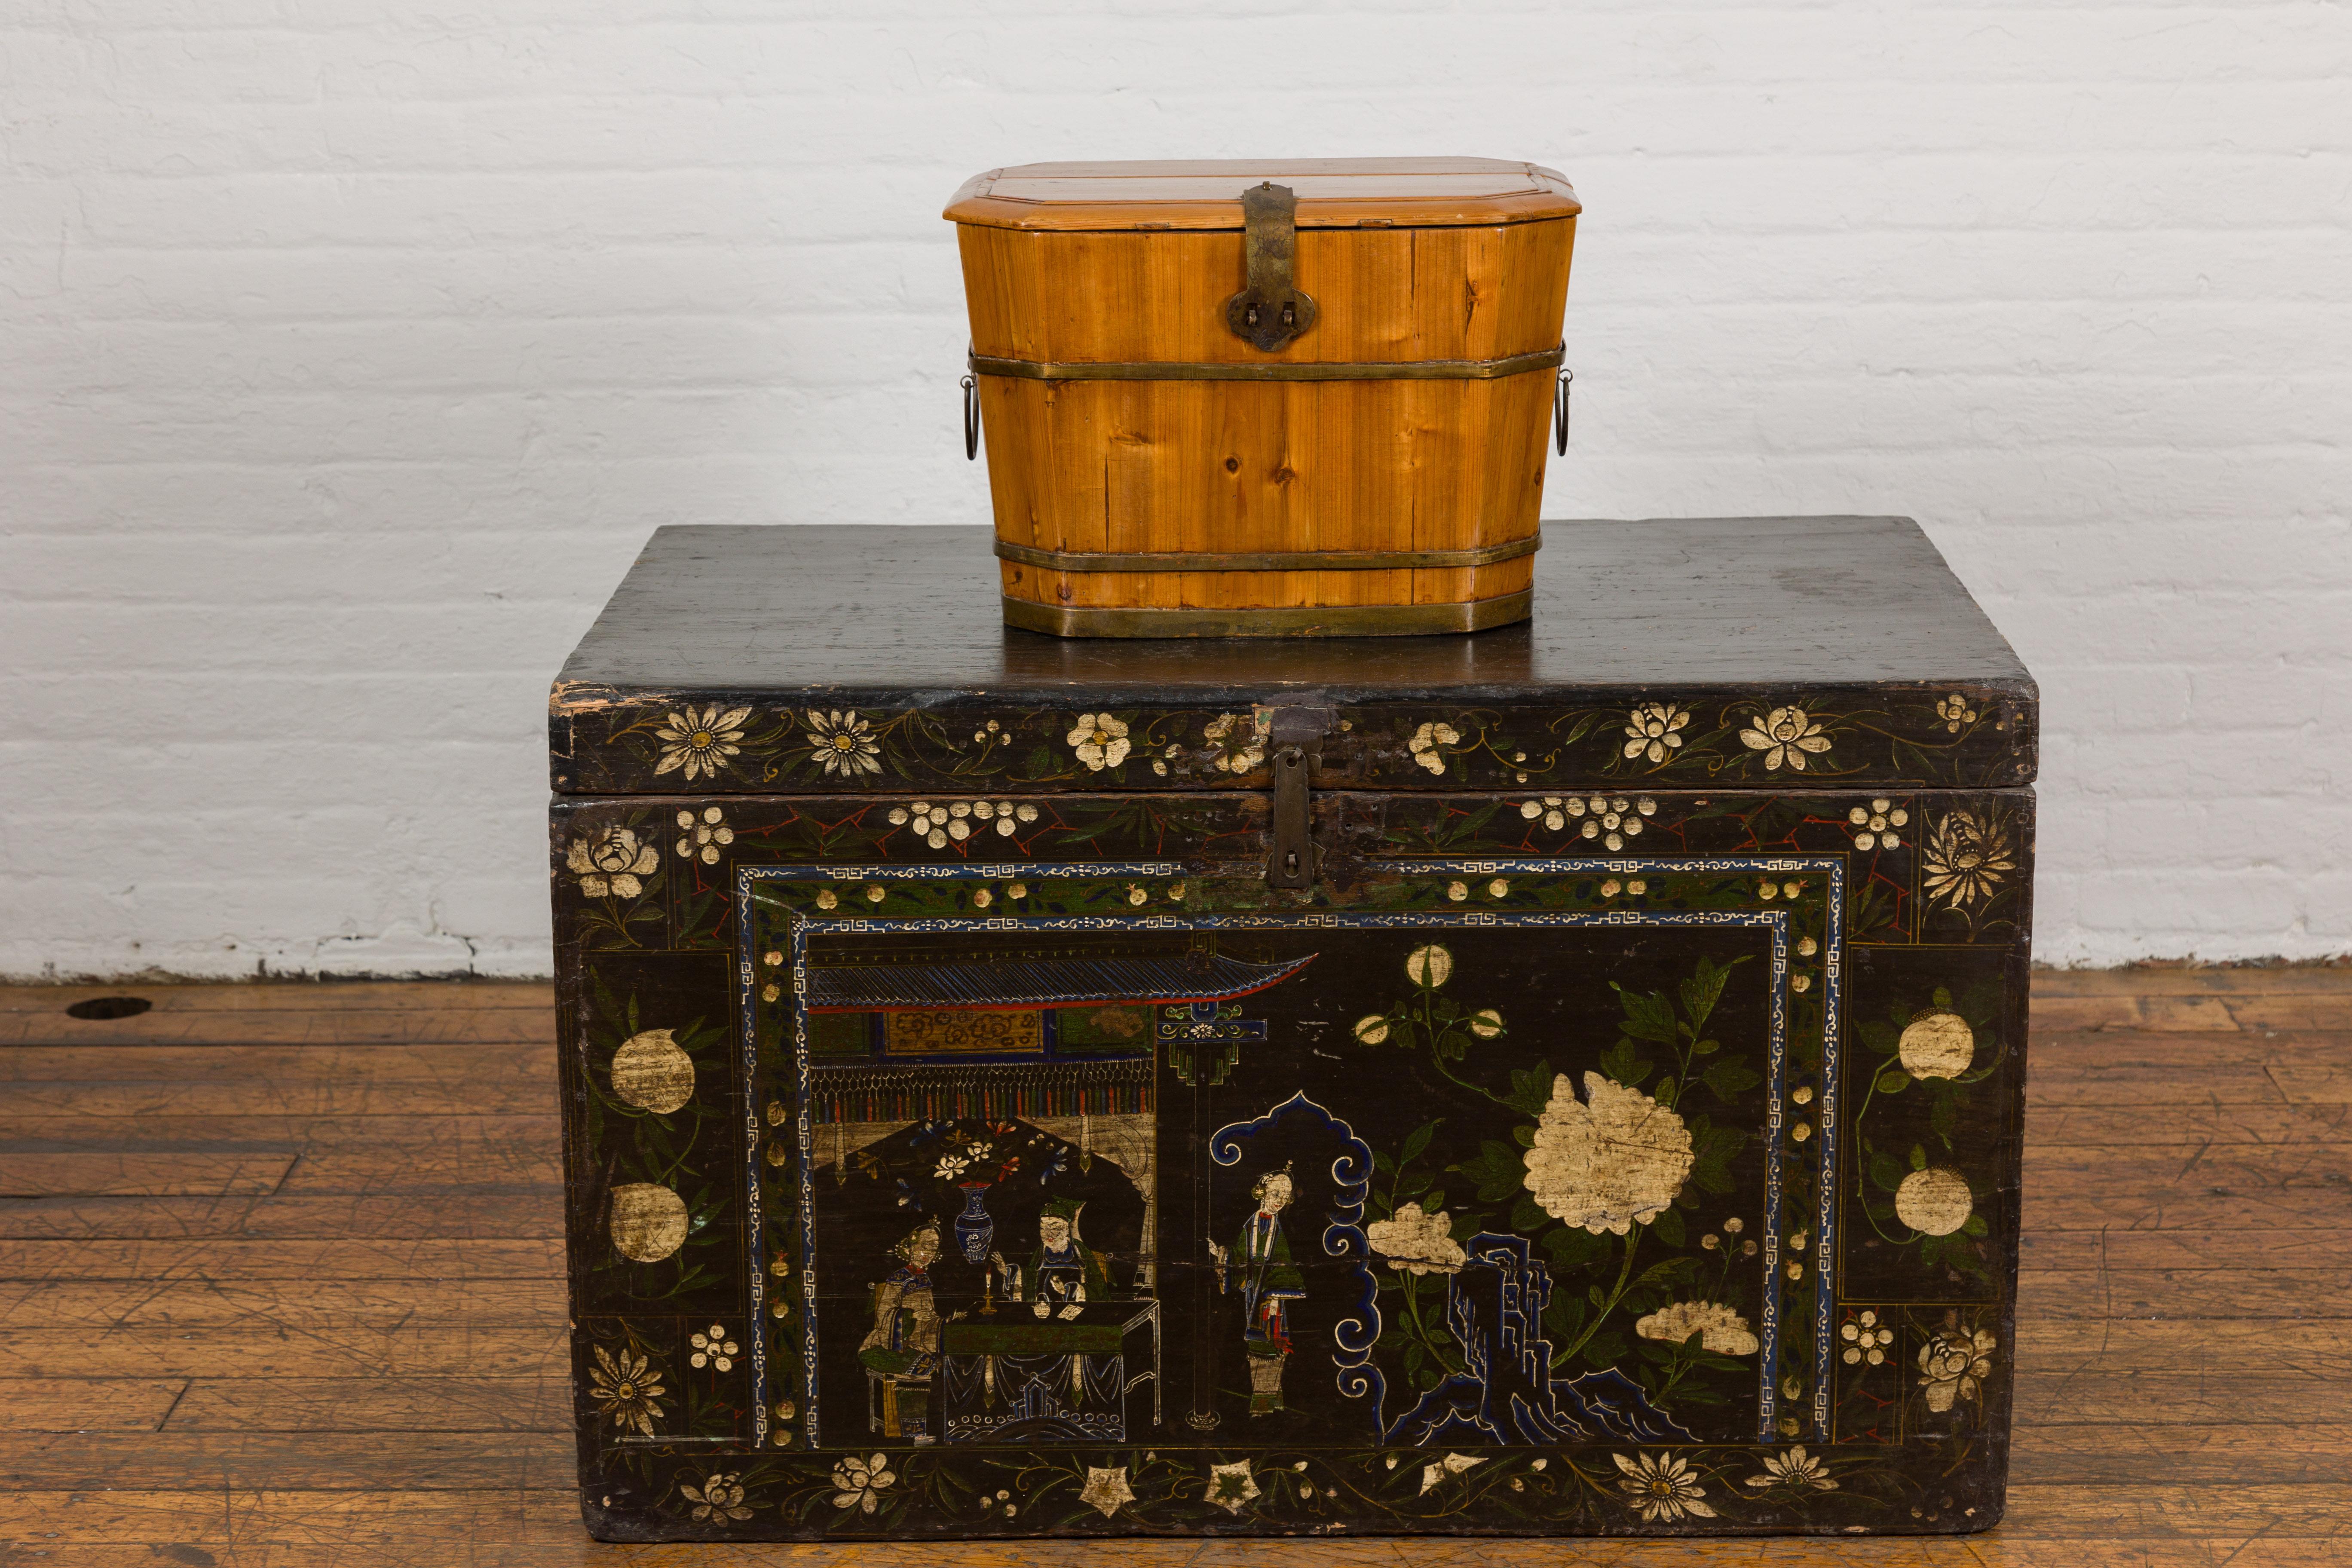 Late Qing Dynasty Wood and Brass Lidded Box with Lateral Handles In Good Condition For Sale In Yonkers, NY